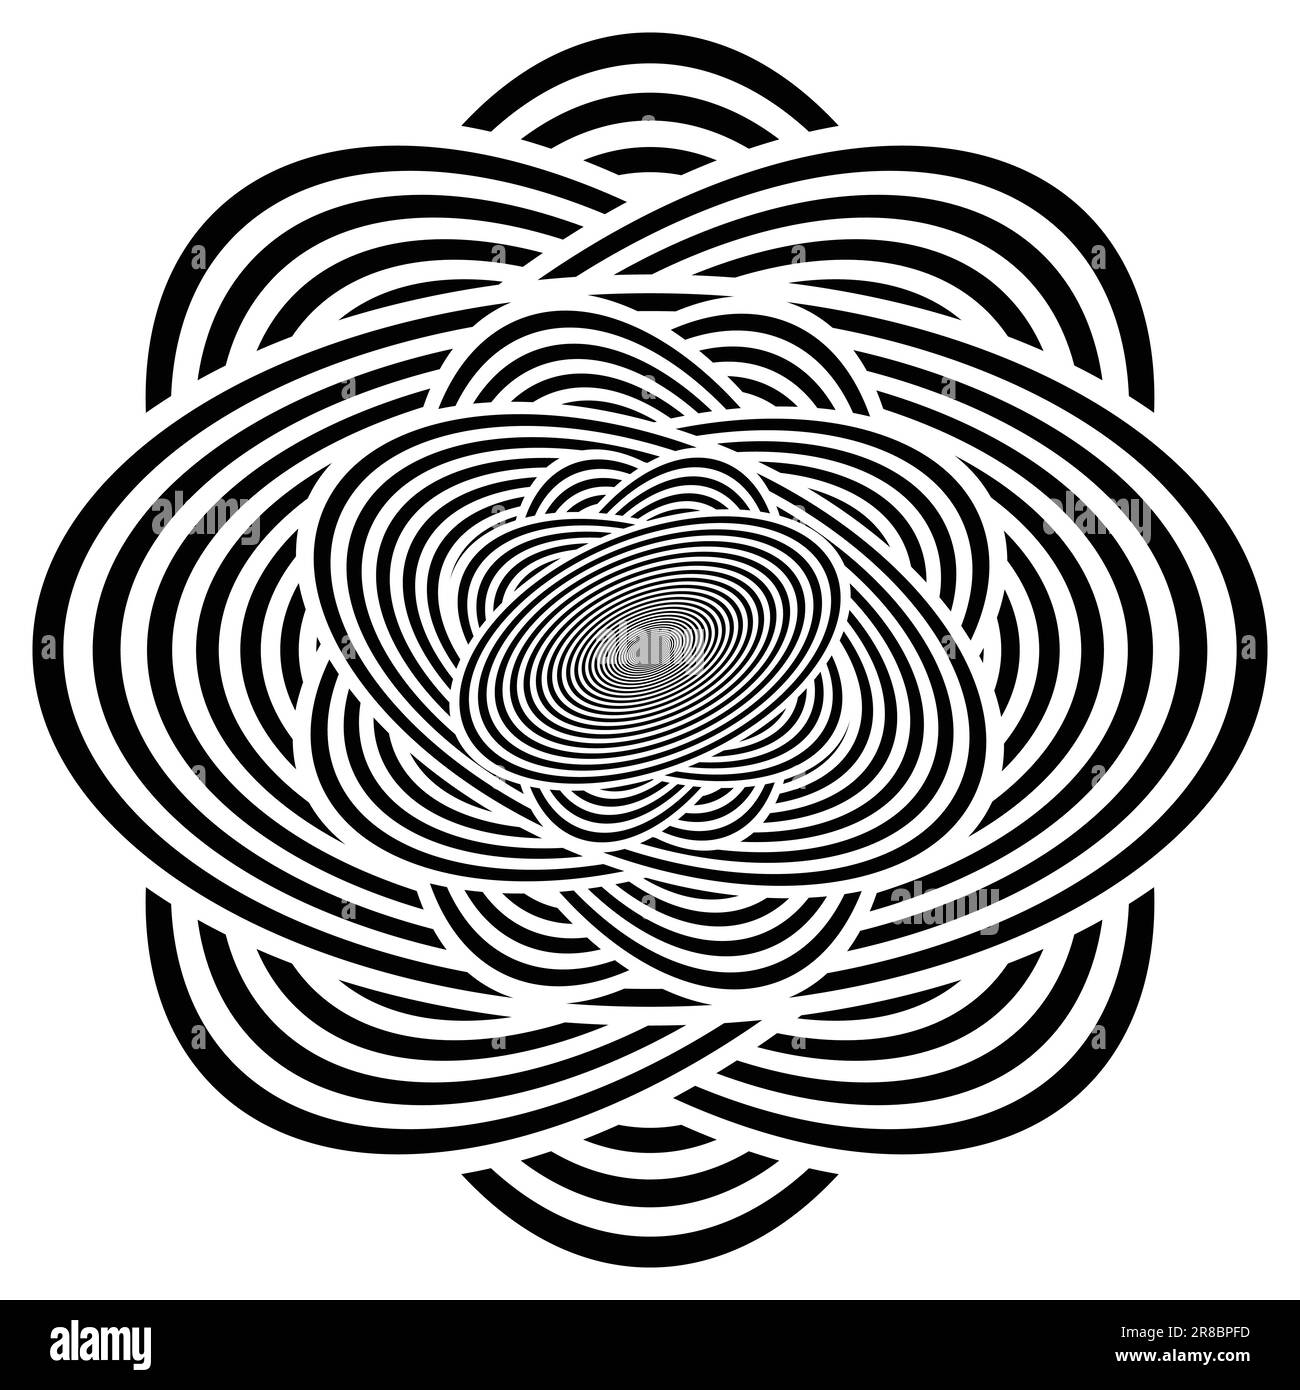 Abstract pattern background with black and white wavy lines circles and curves Stock Vector